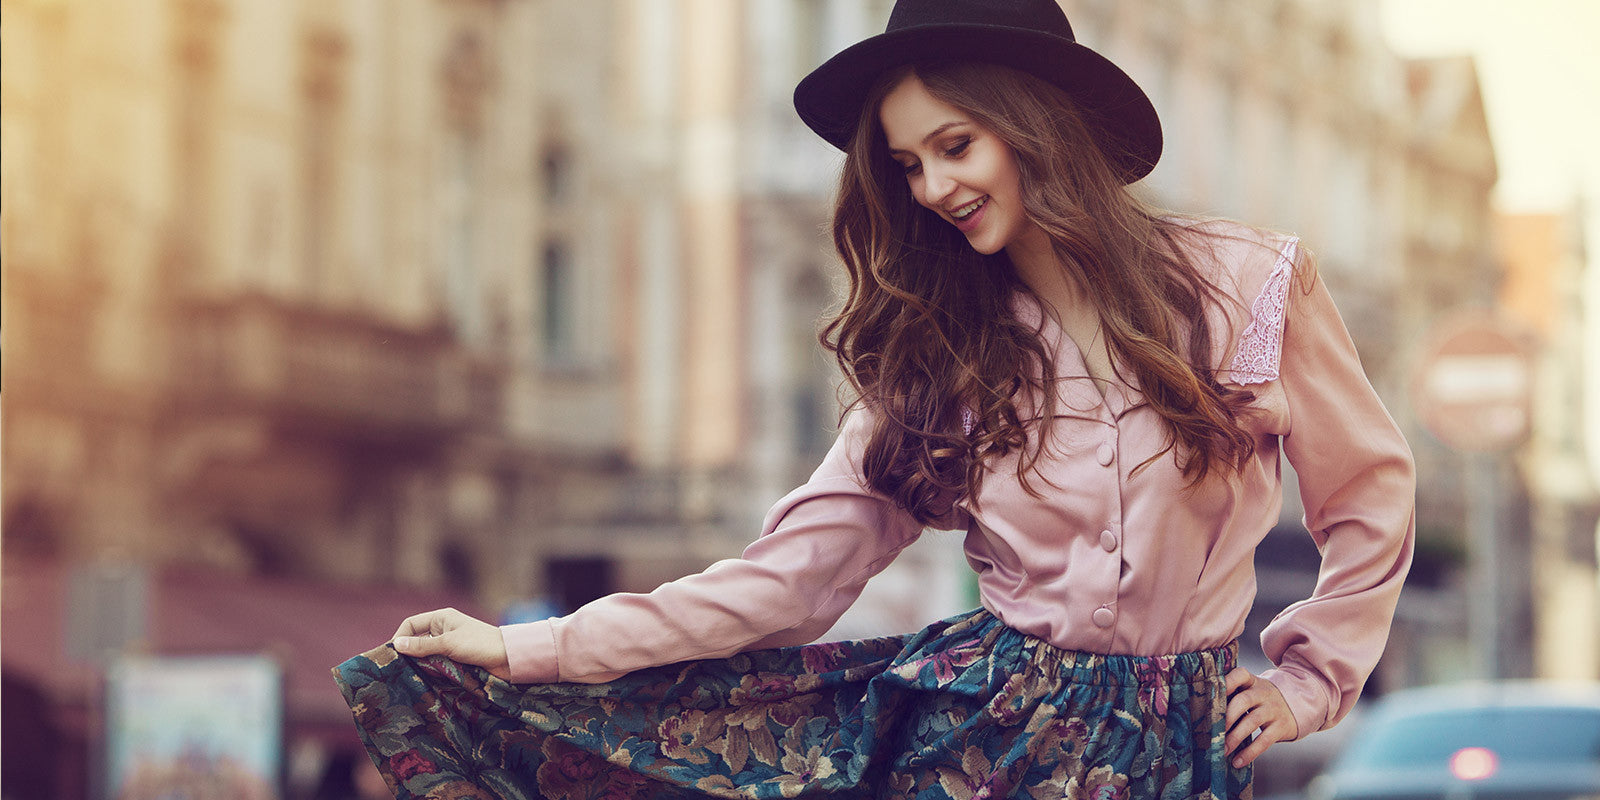 Fedora goes well with ethnic wear too!